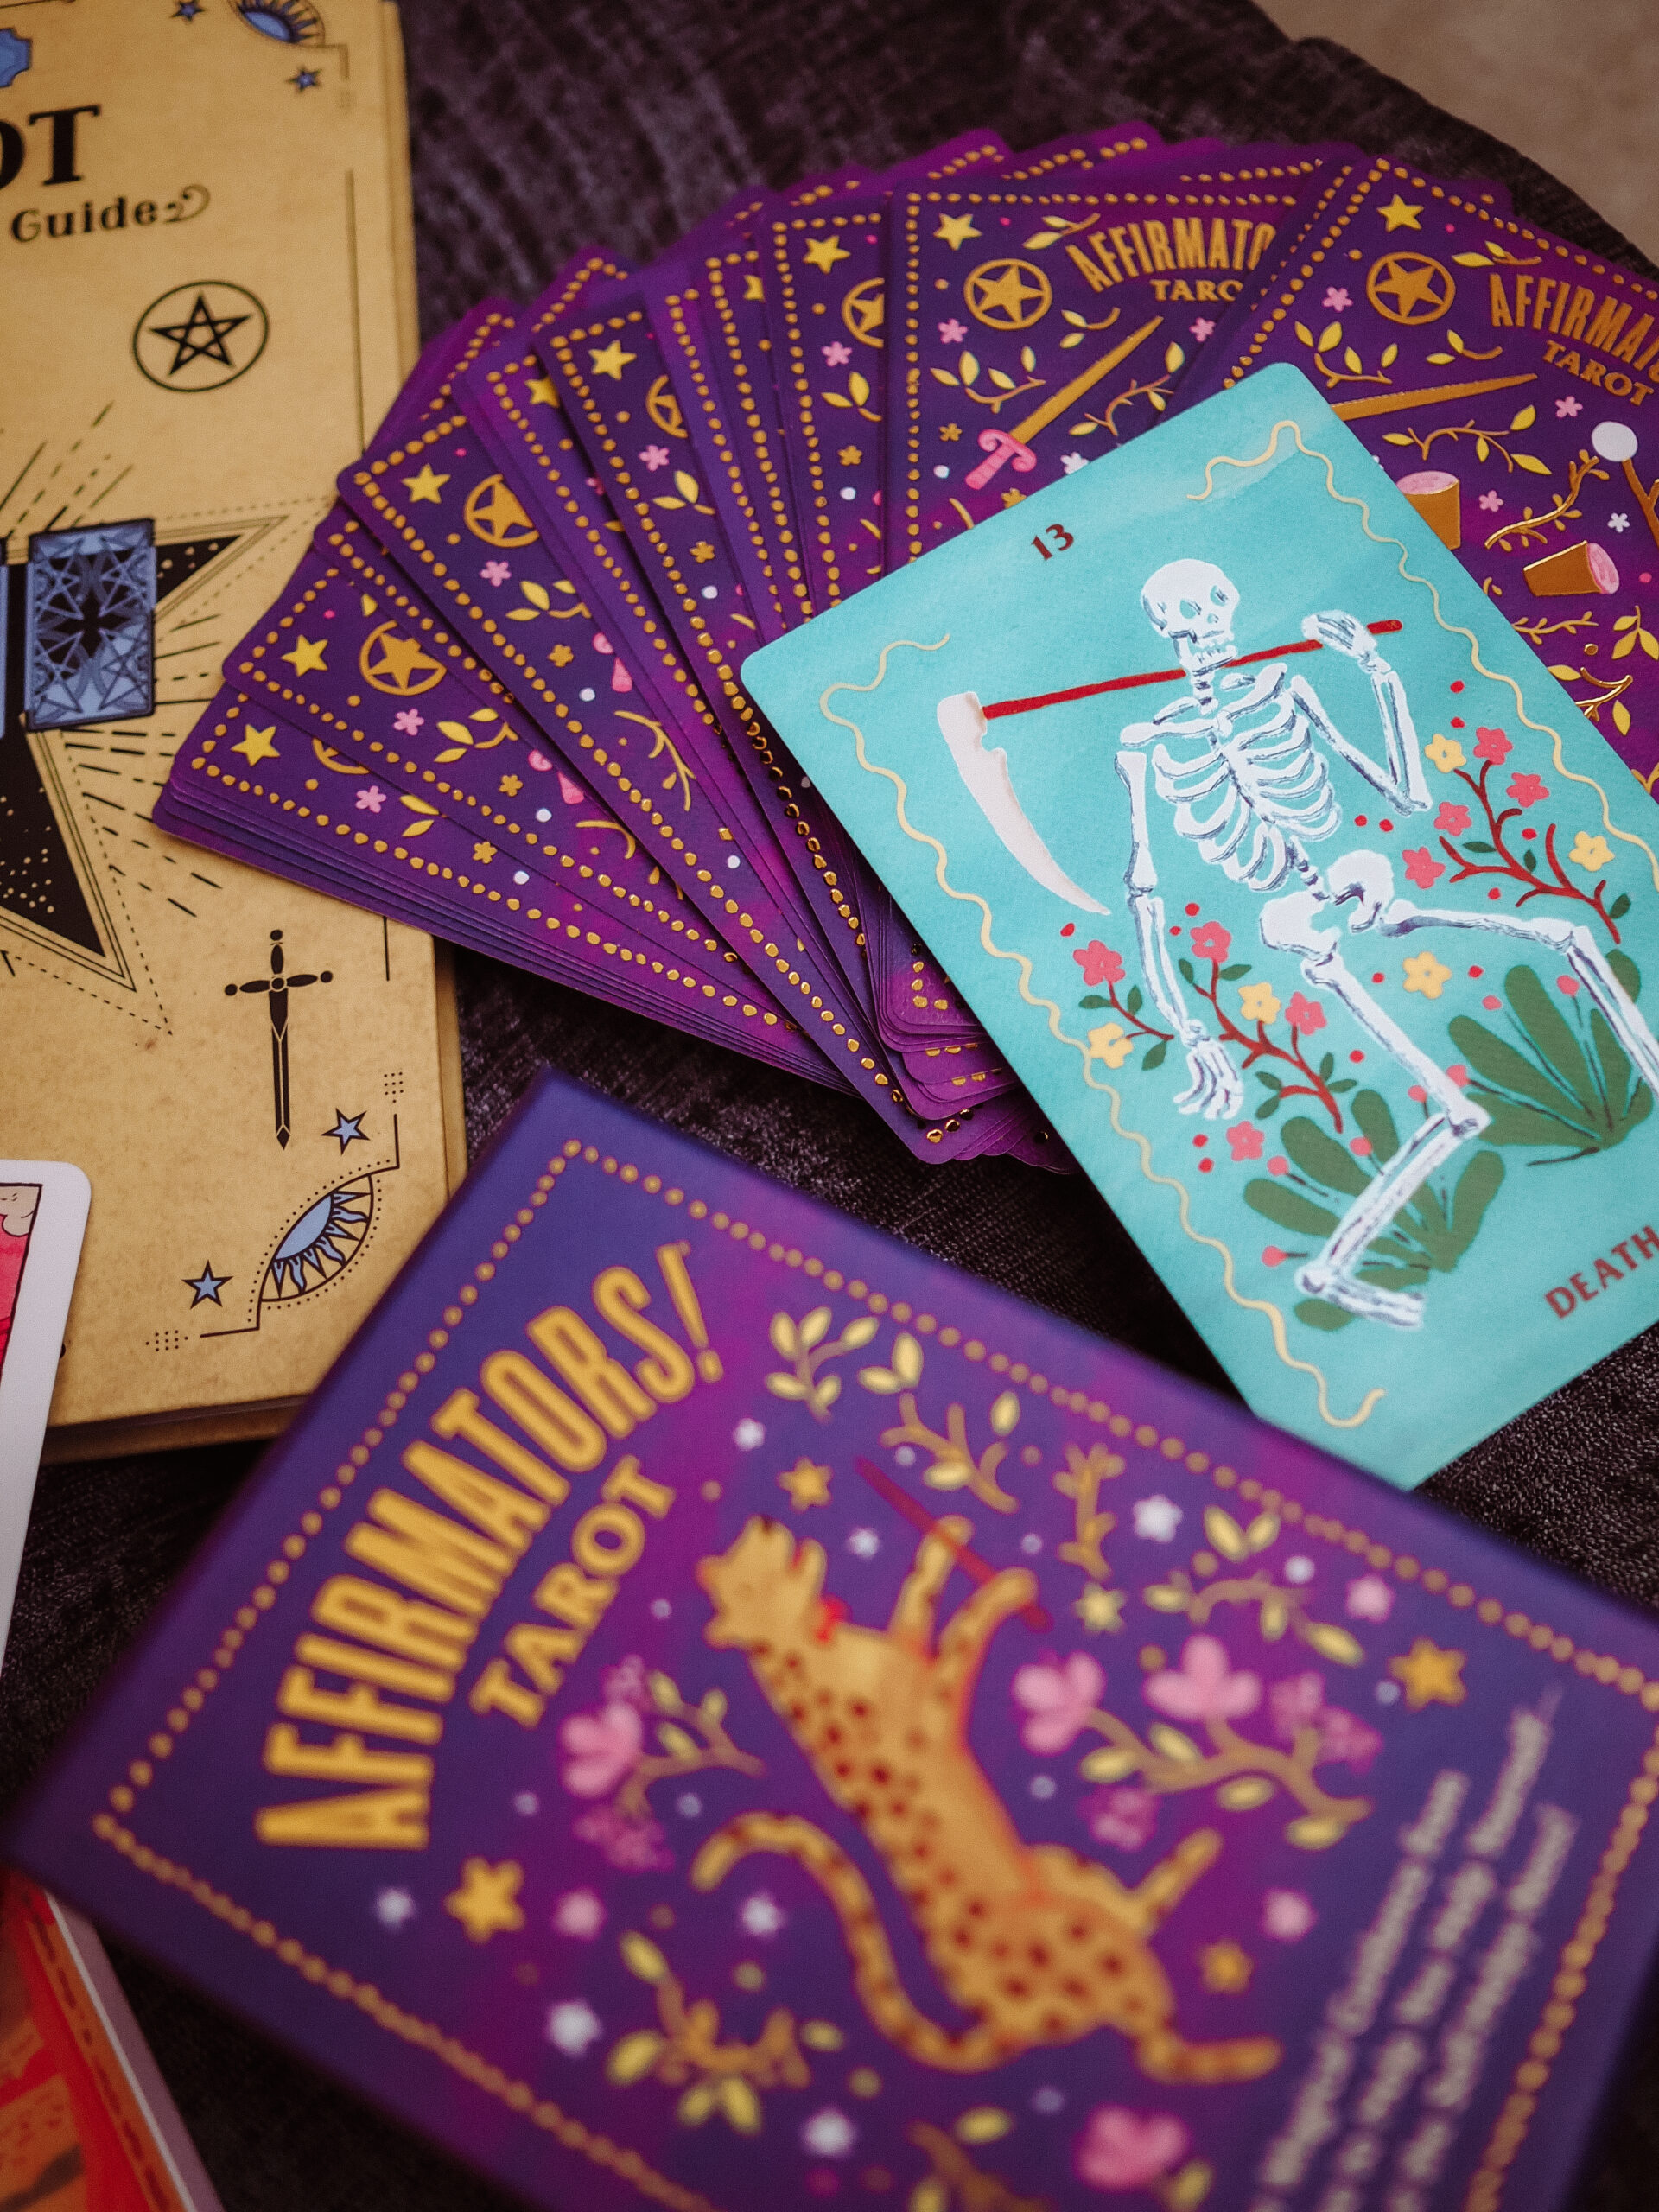 Learn how to do your own daily tarot reading free with this guide on the ins and outs of tarot spreads for beginners!